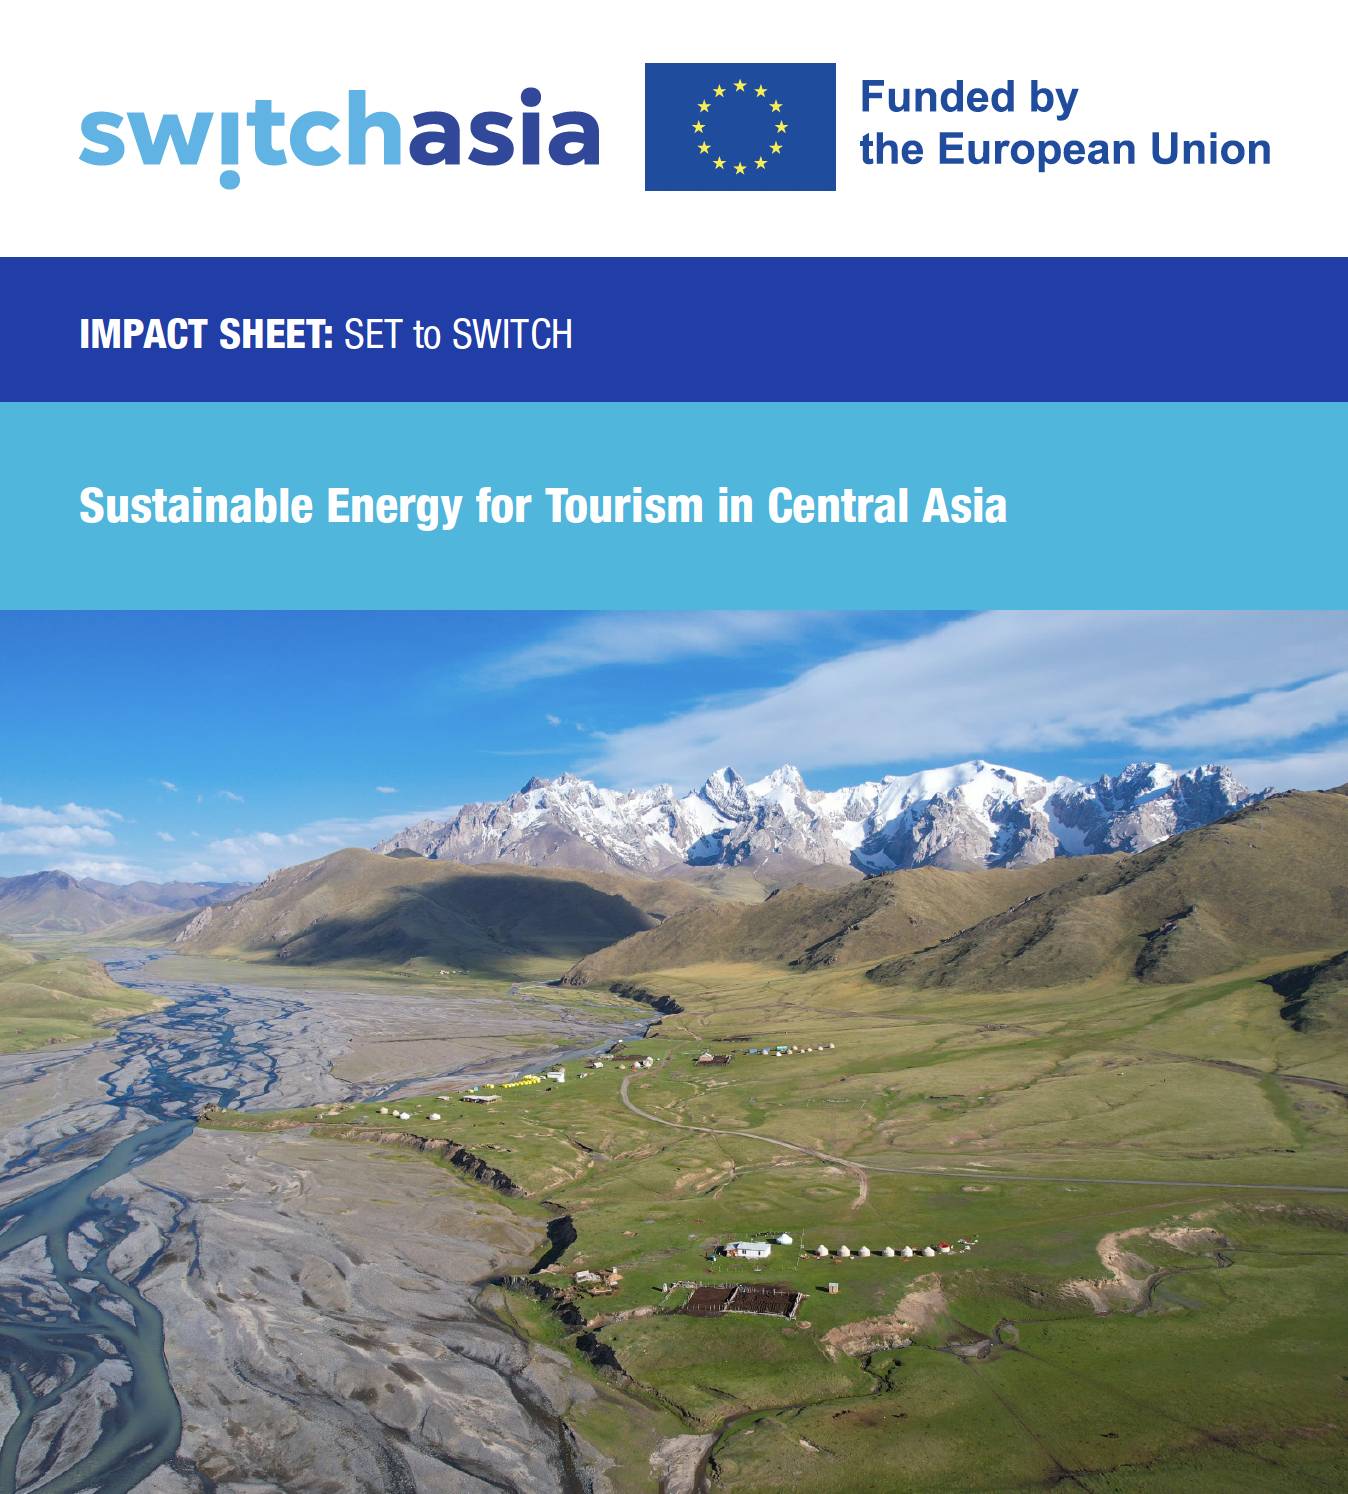 Impact Sheet: Sustainable Energy for Tourism in Central Asia